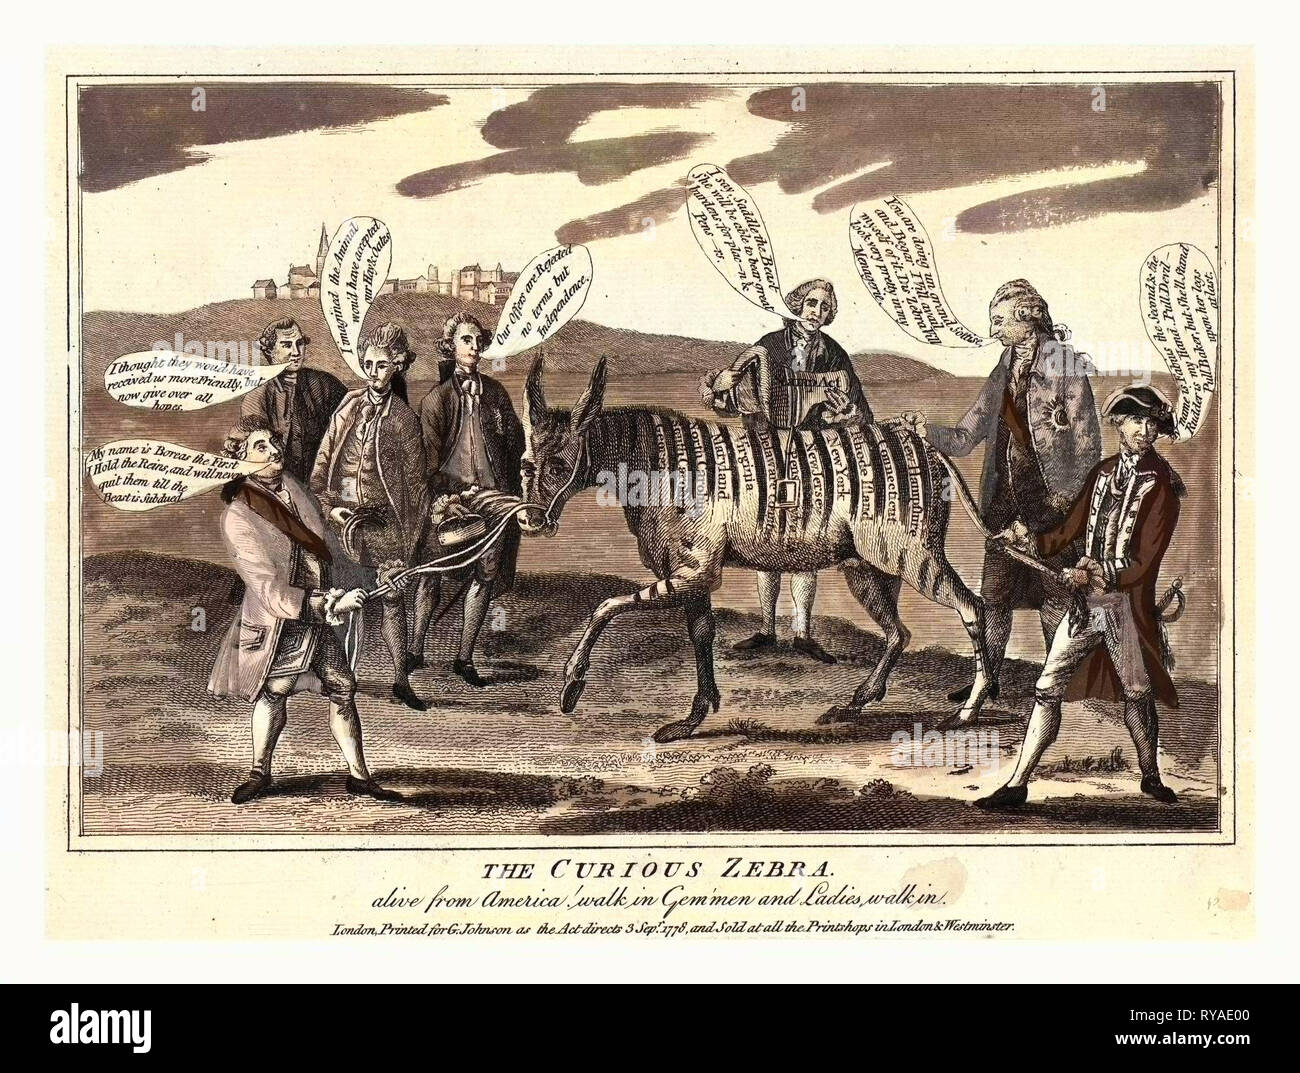 The Curious Zebra Alive from America! Walk in Gem'Men and Ladies, Walk in, Cartoon Shows a Group of Men, Including George Washington Who is Standing to the Right Holding the Tail of the Zebra, and Lord North, Standing on the Left Gripping the Reins, Trying to Guide the Zebra on Whose Stripes Are the Names of the Thirteen Colonies Stock Photo